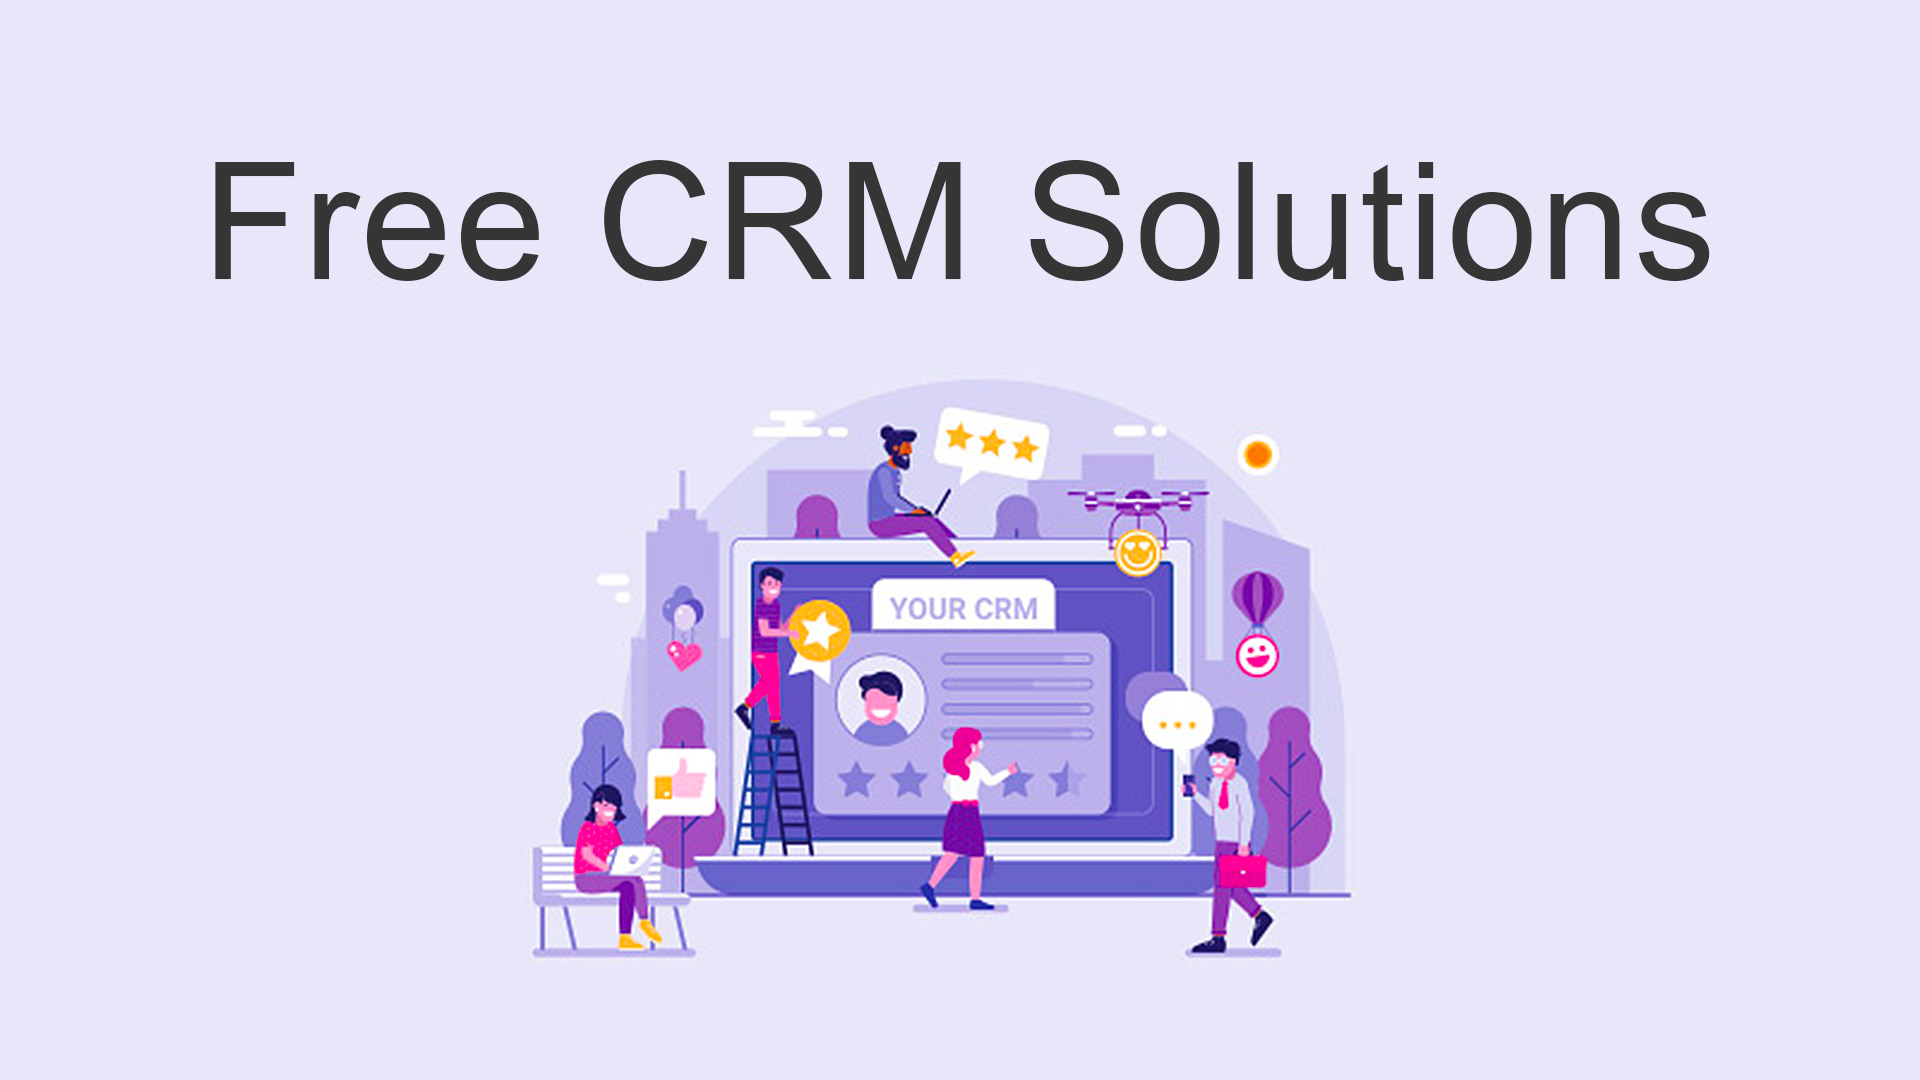 Free CRM solutions